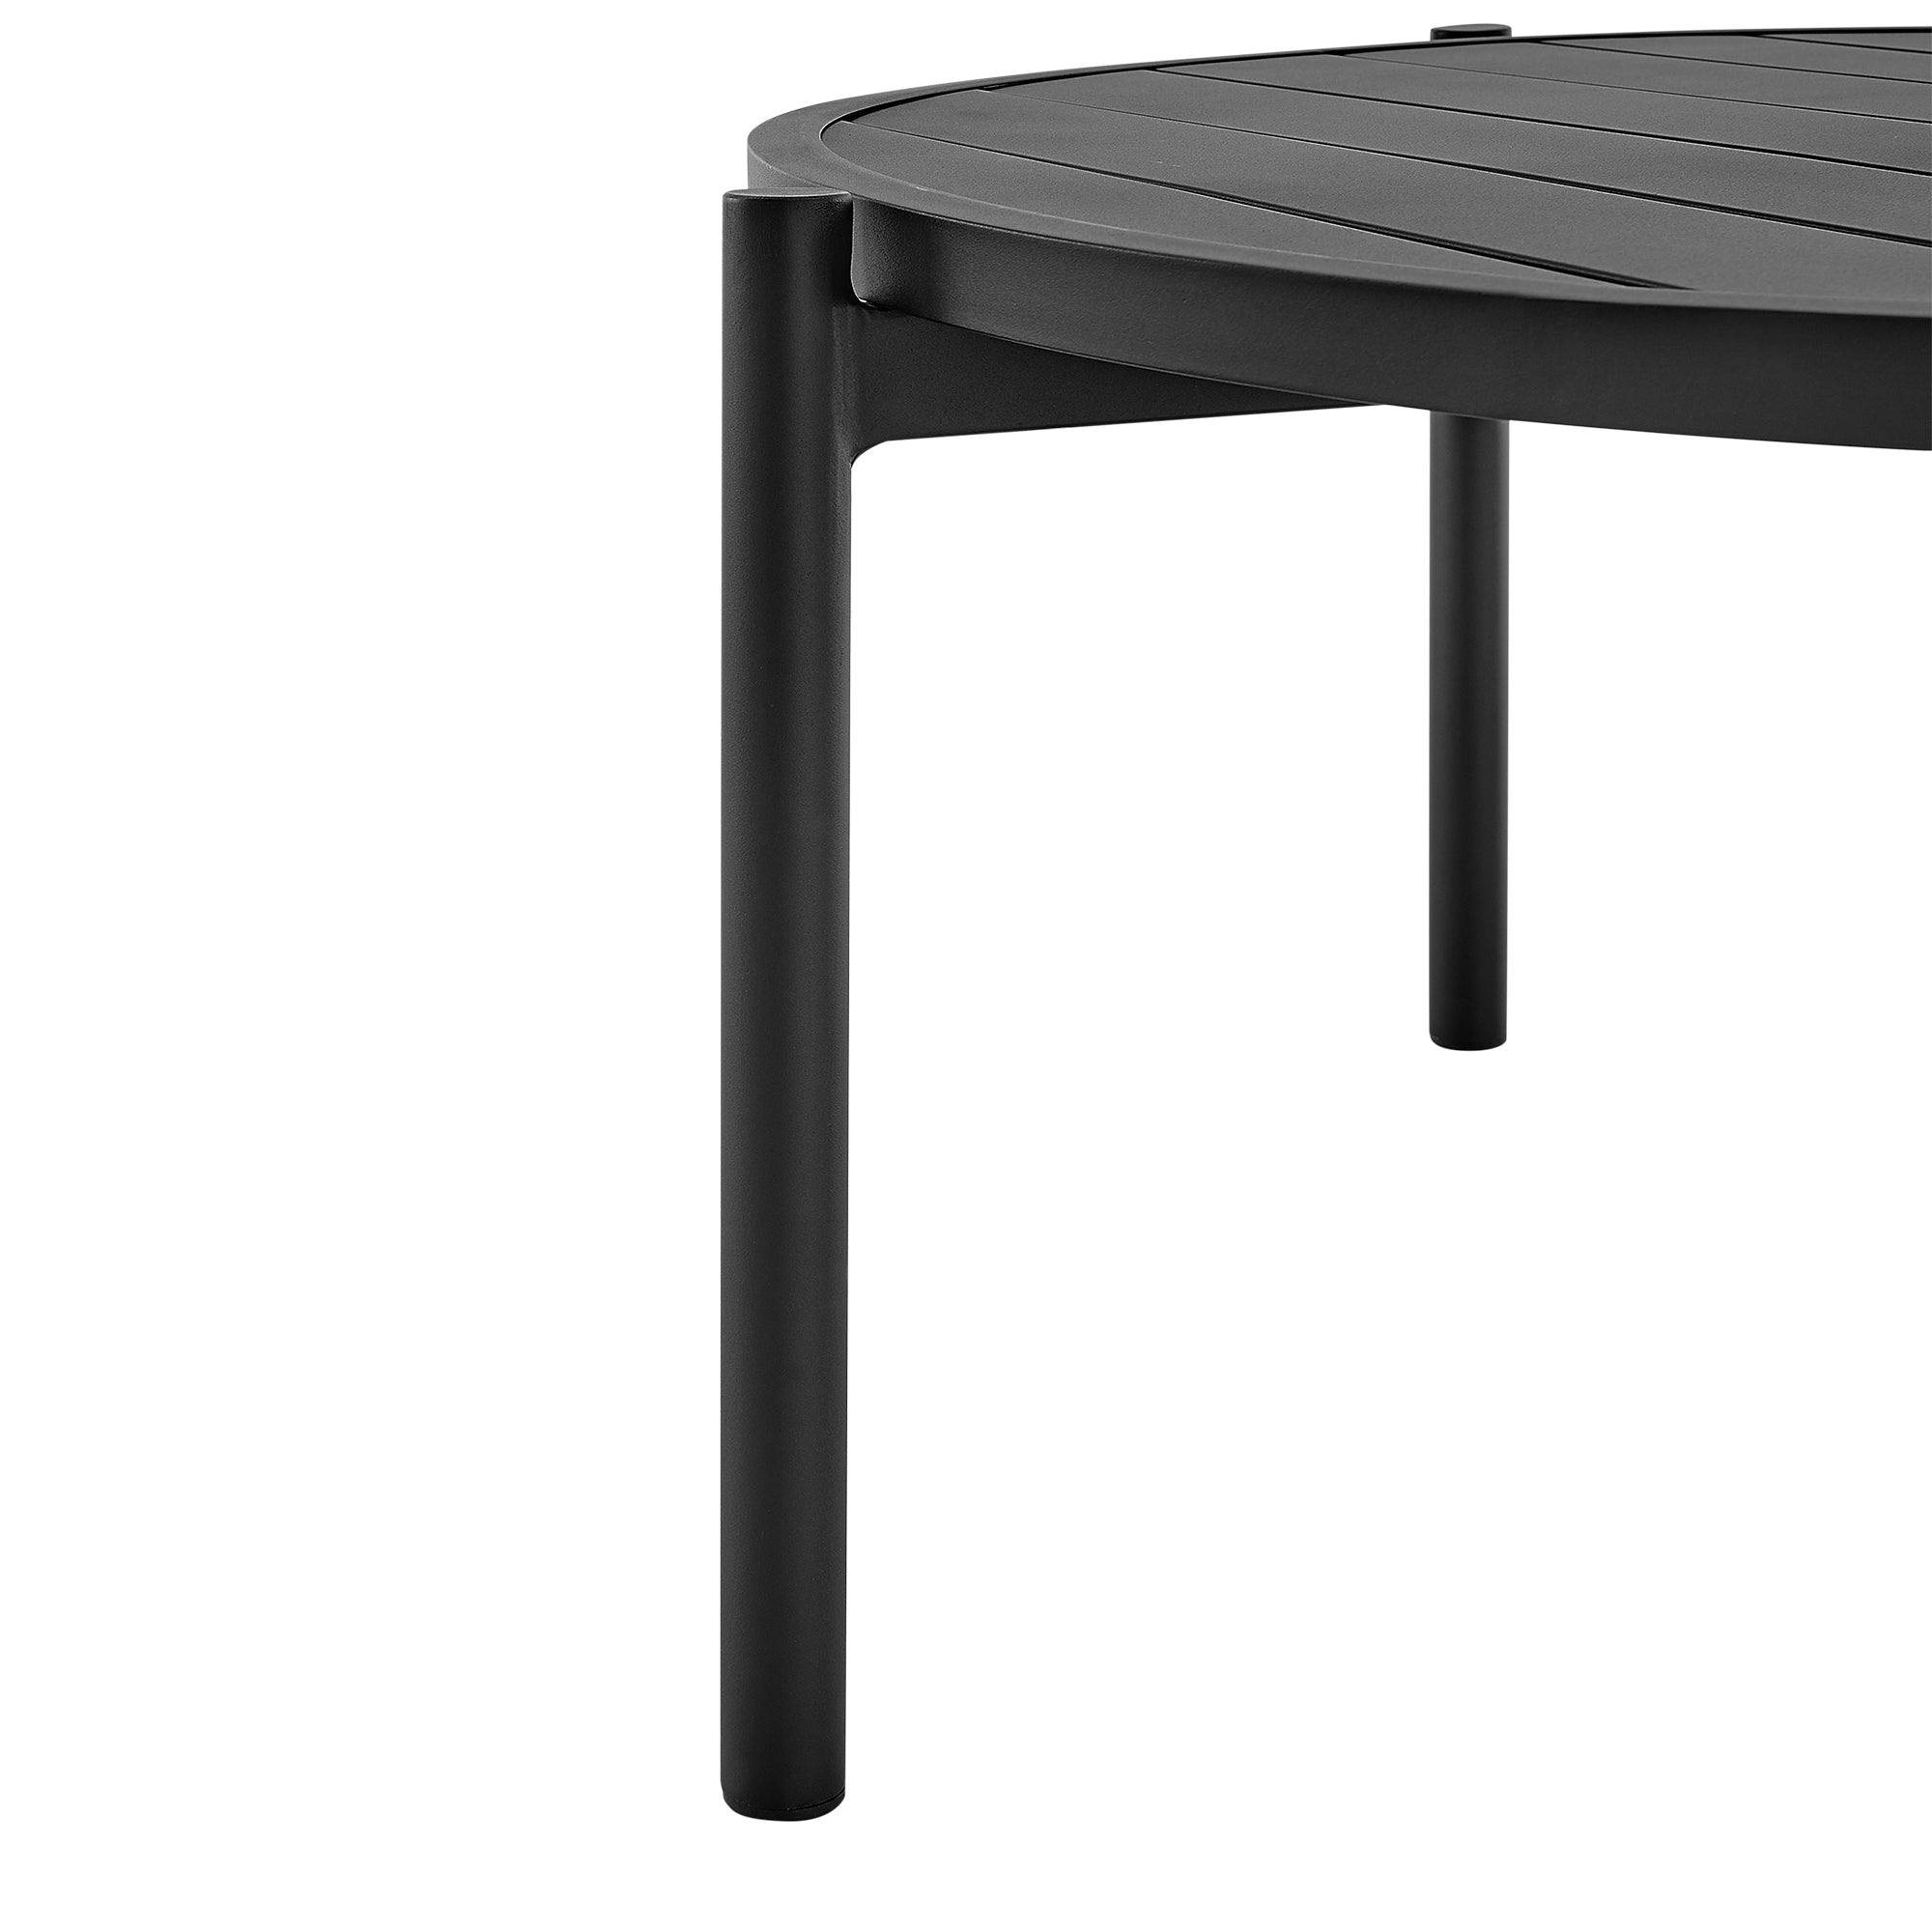 Armen Living - Tiffany Outdoor Patio Ruond Coffee Table in Black Aluminum - 840254332577